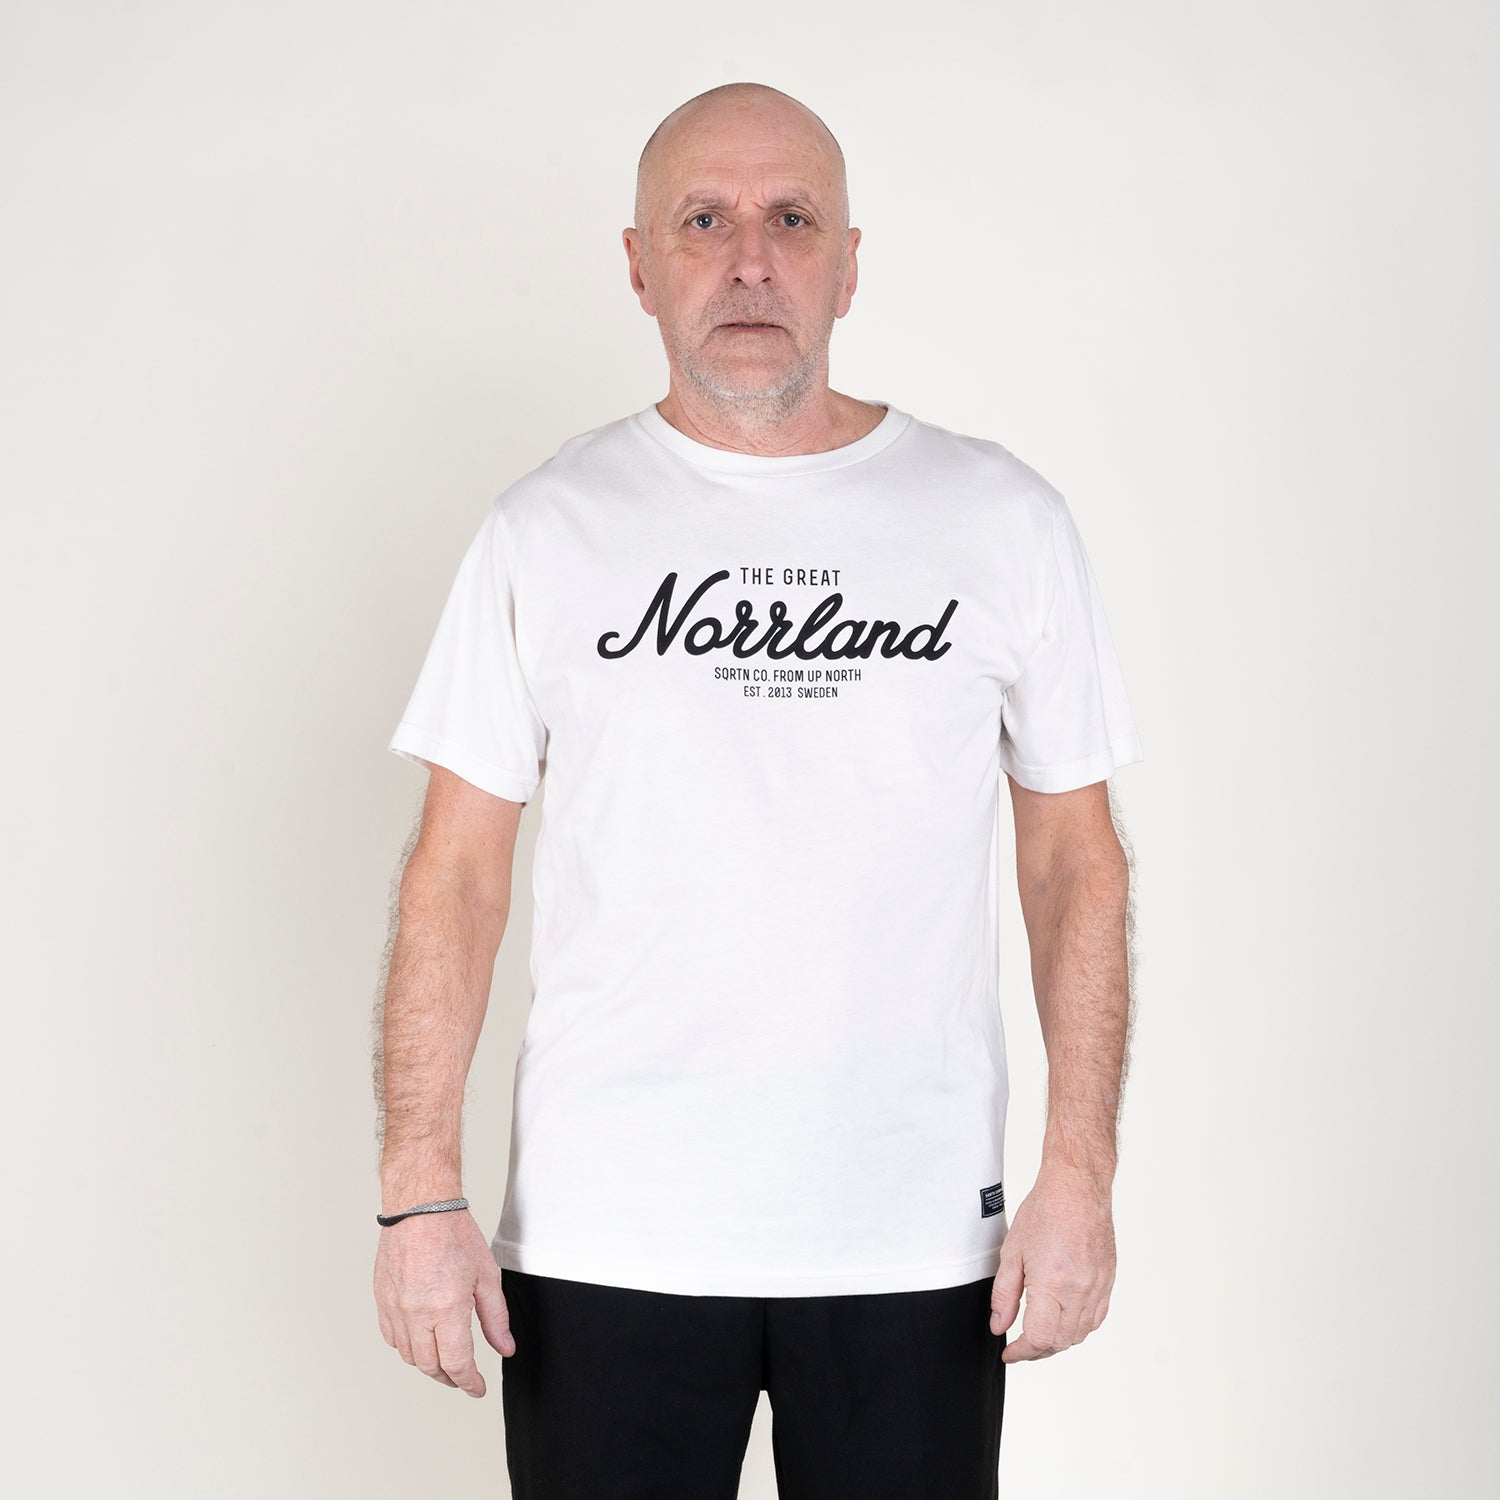 GREAT NORRLAND T-SHIRT - WHITE